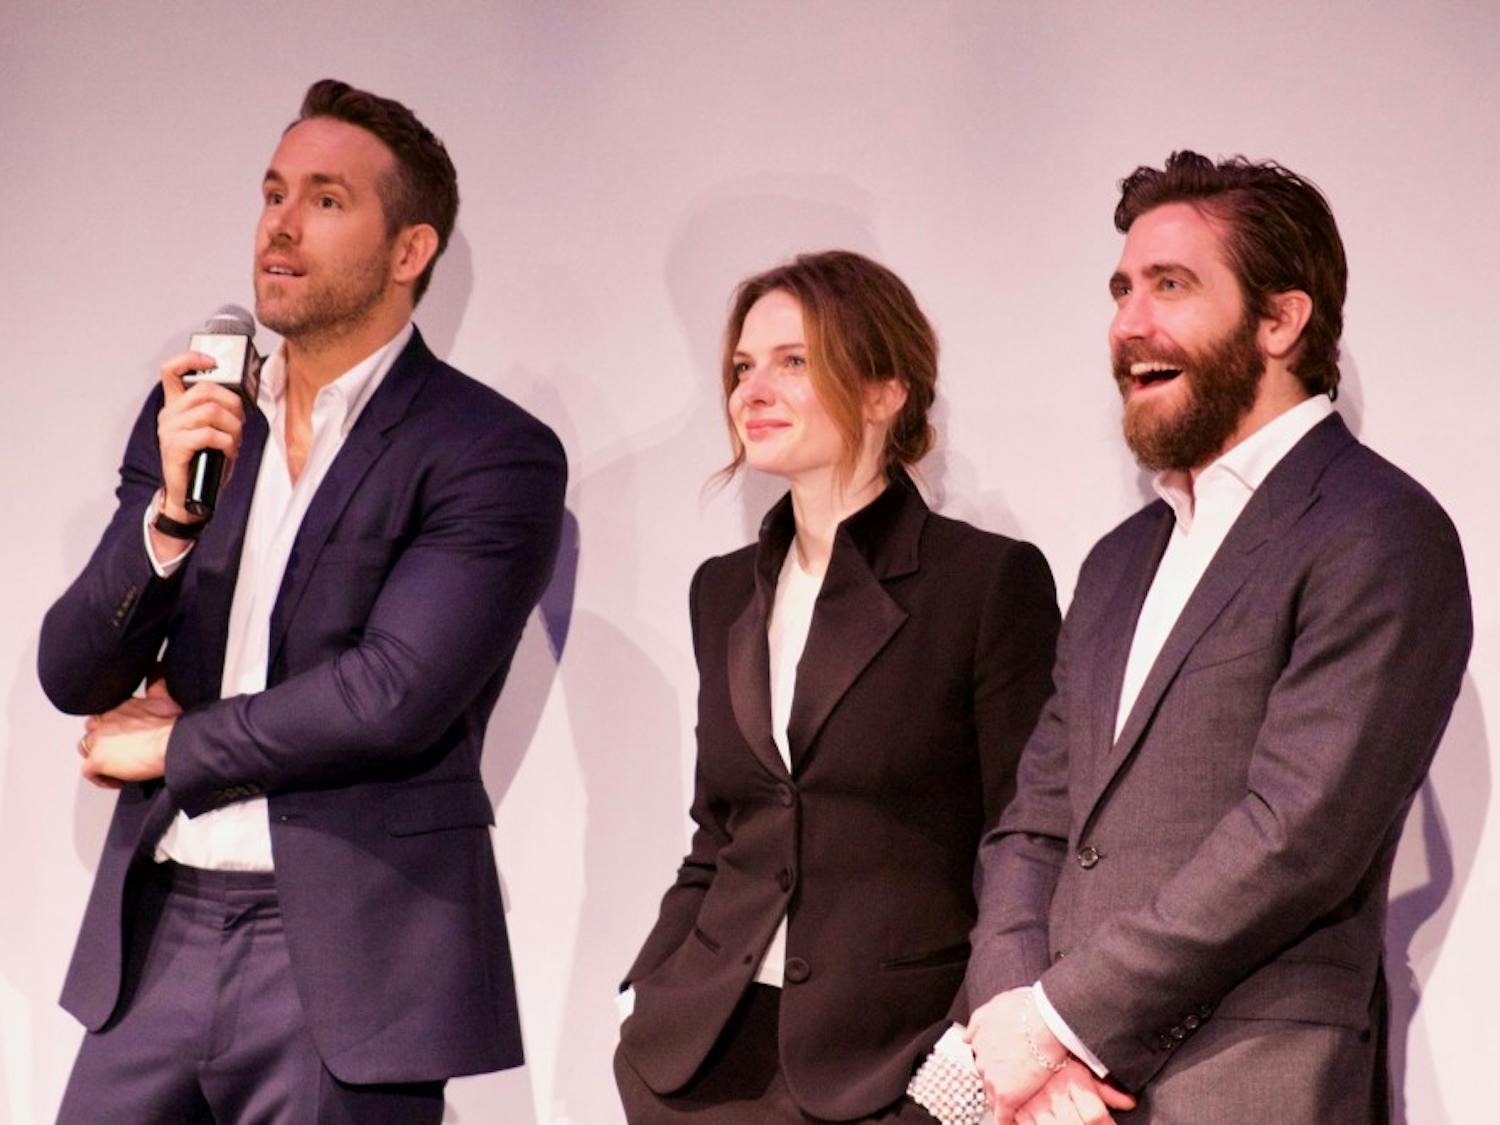 From left: Ryan Reynolds, Rebecca Ferguson and Jake Gyllenhaal at the premiere of "Life" at ZACH Theatre.